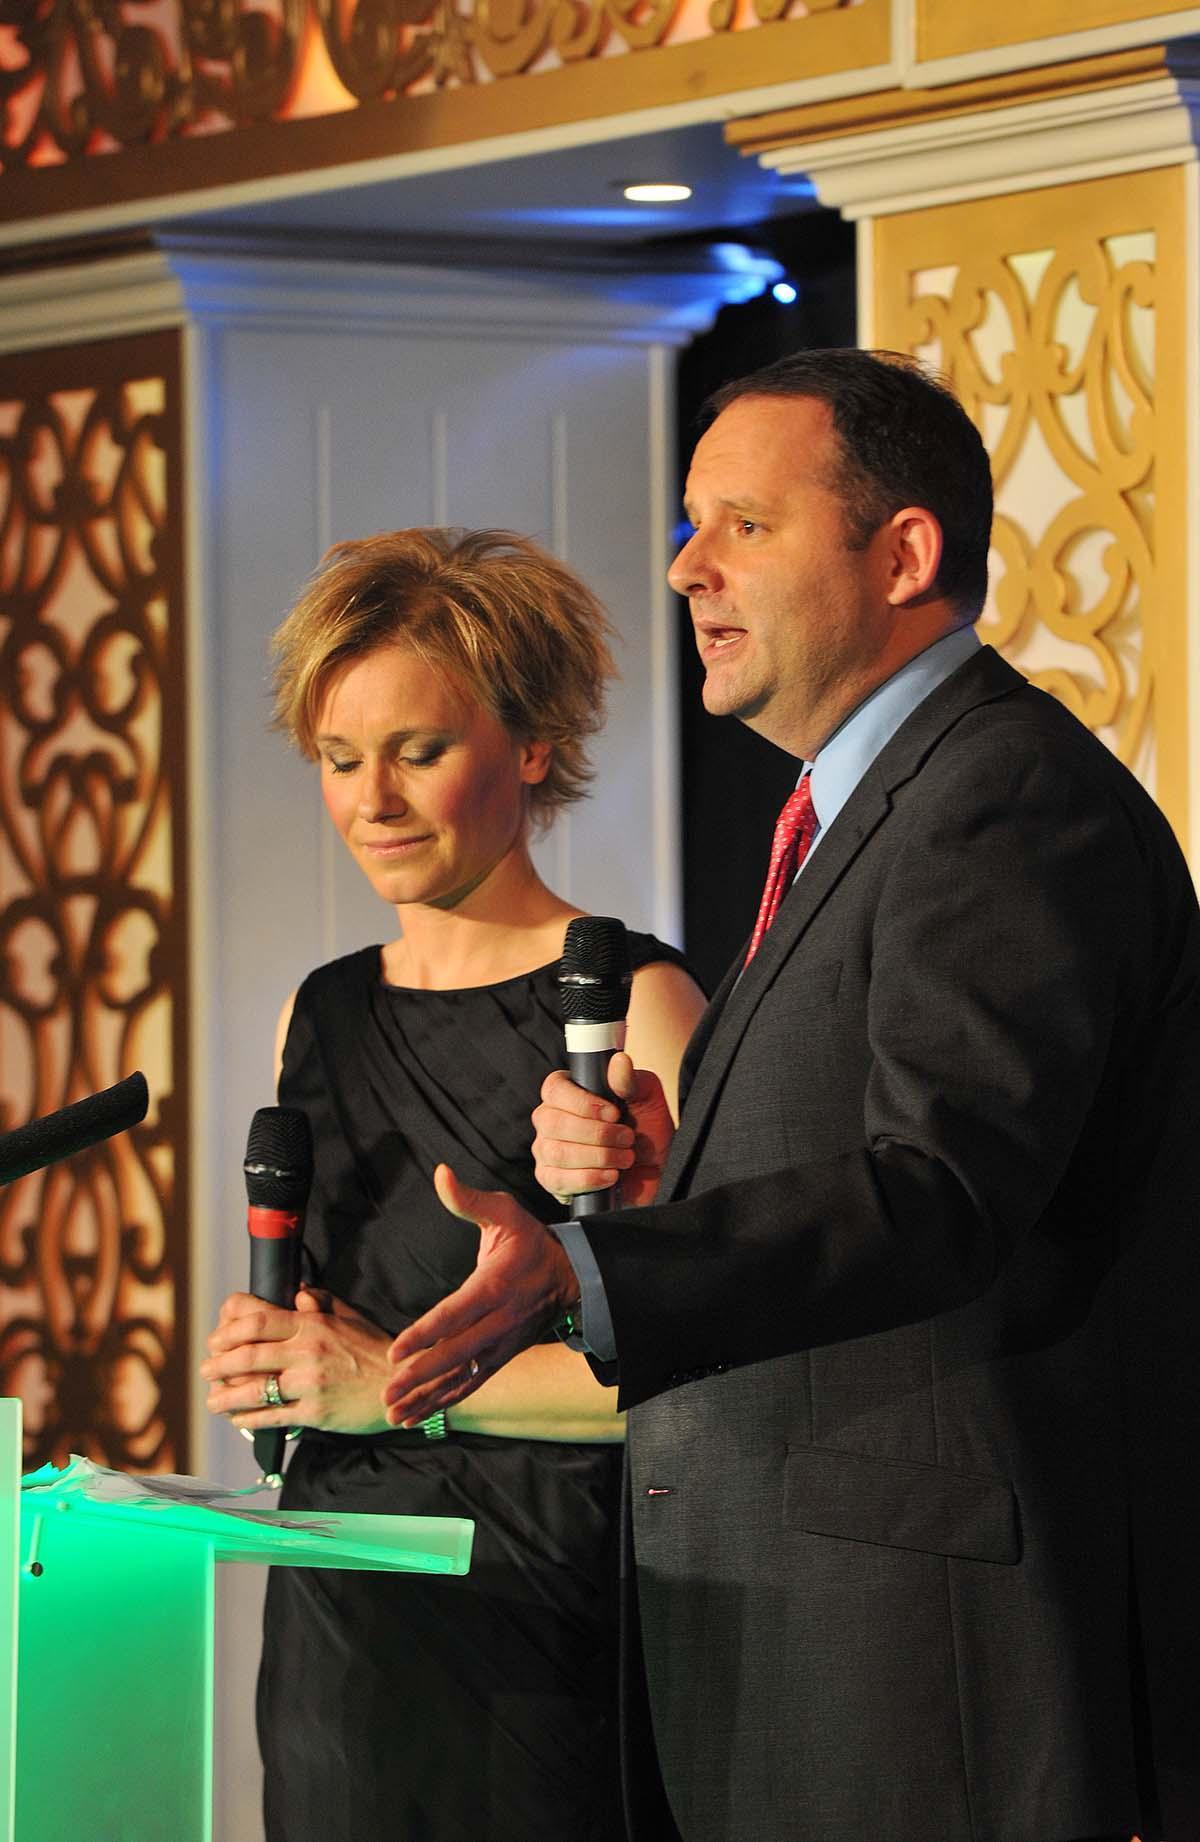 The event was compered by BBC Radio Oxford's Jerome Sale and BBC Television's Lizzie Greenwood-Hughes.
